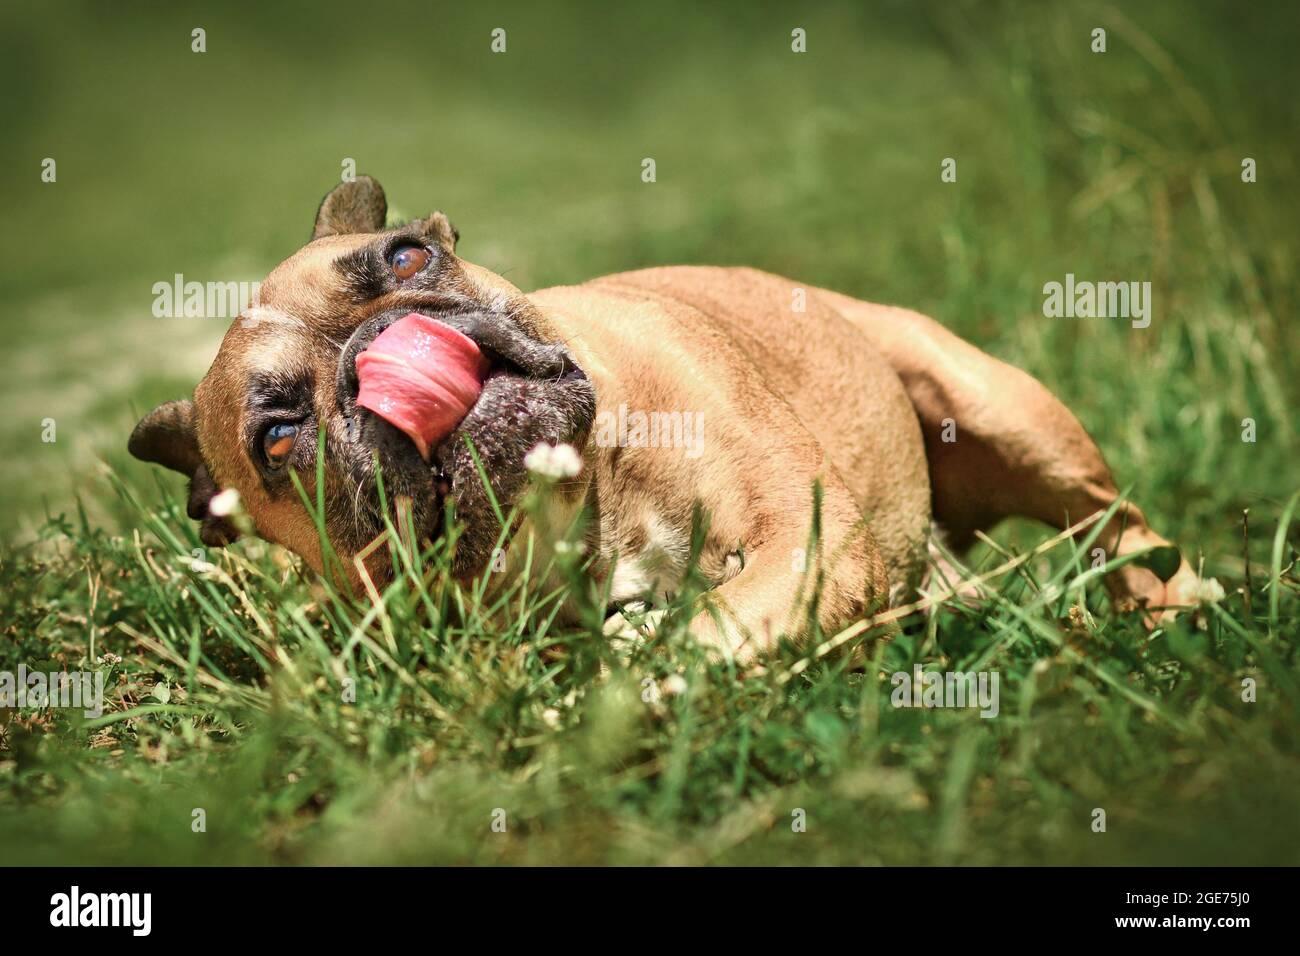 Funny French Bulldog dog licking nose while rolling in grass Stock Photo